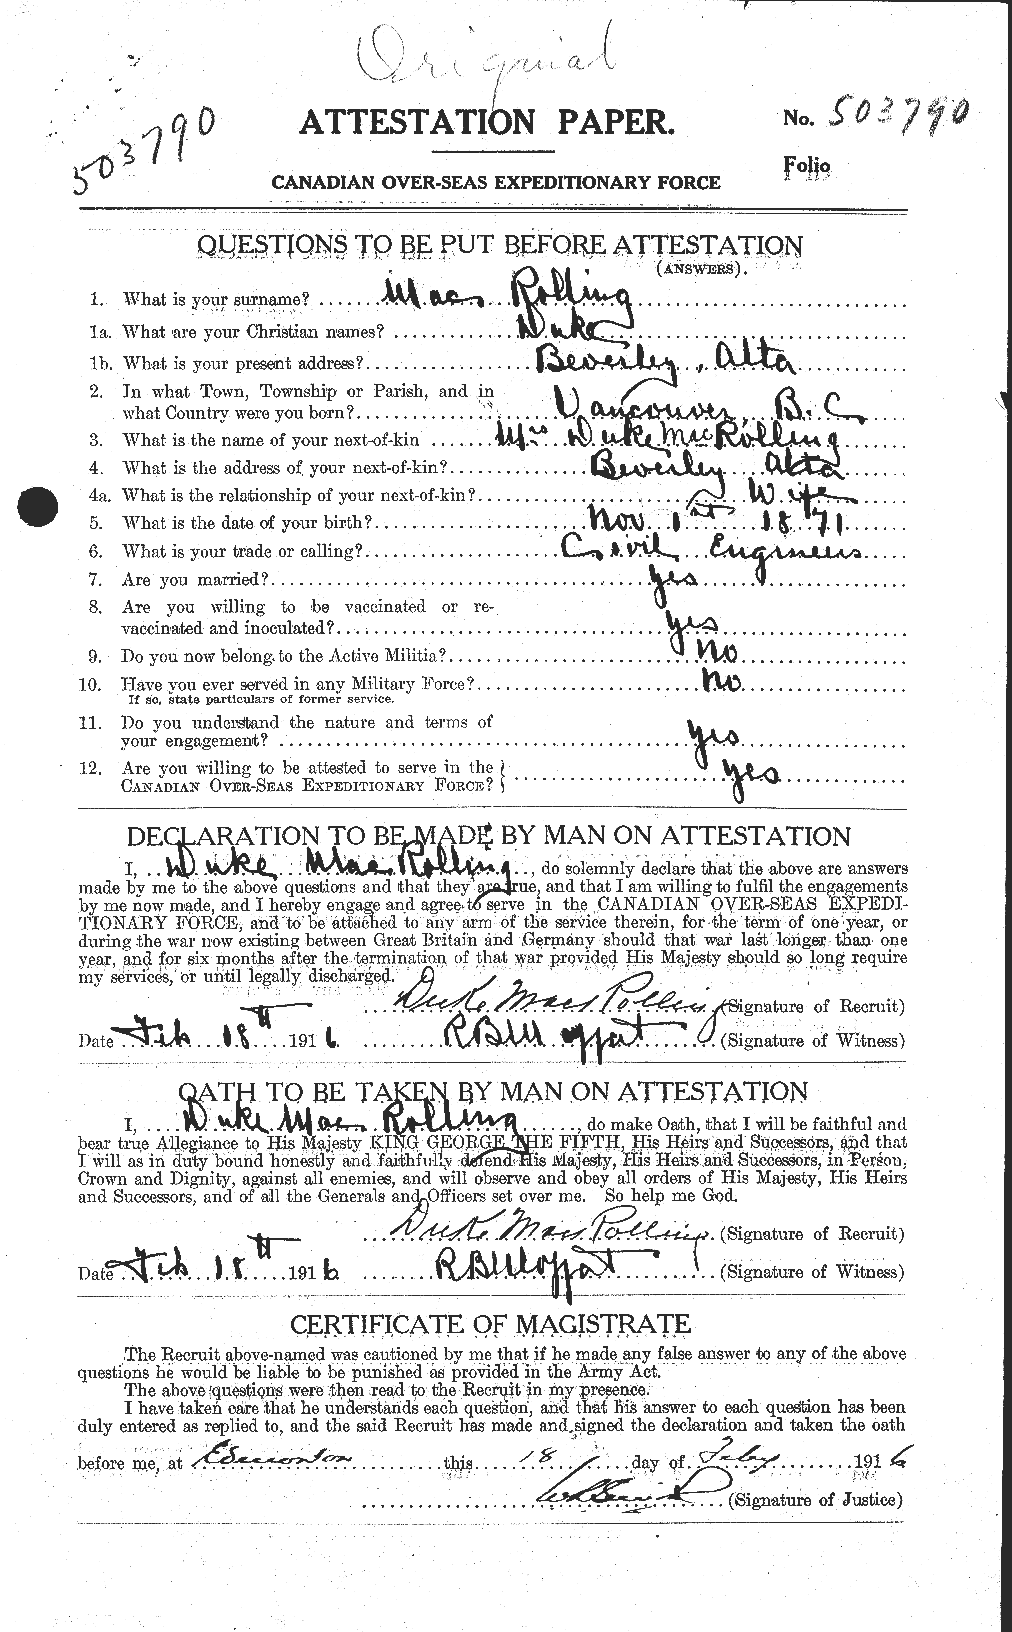 Personnel Records of the First World War - CEF 544760a